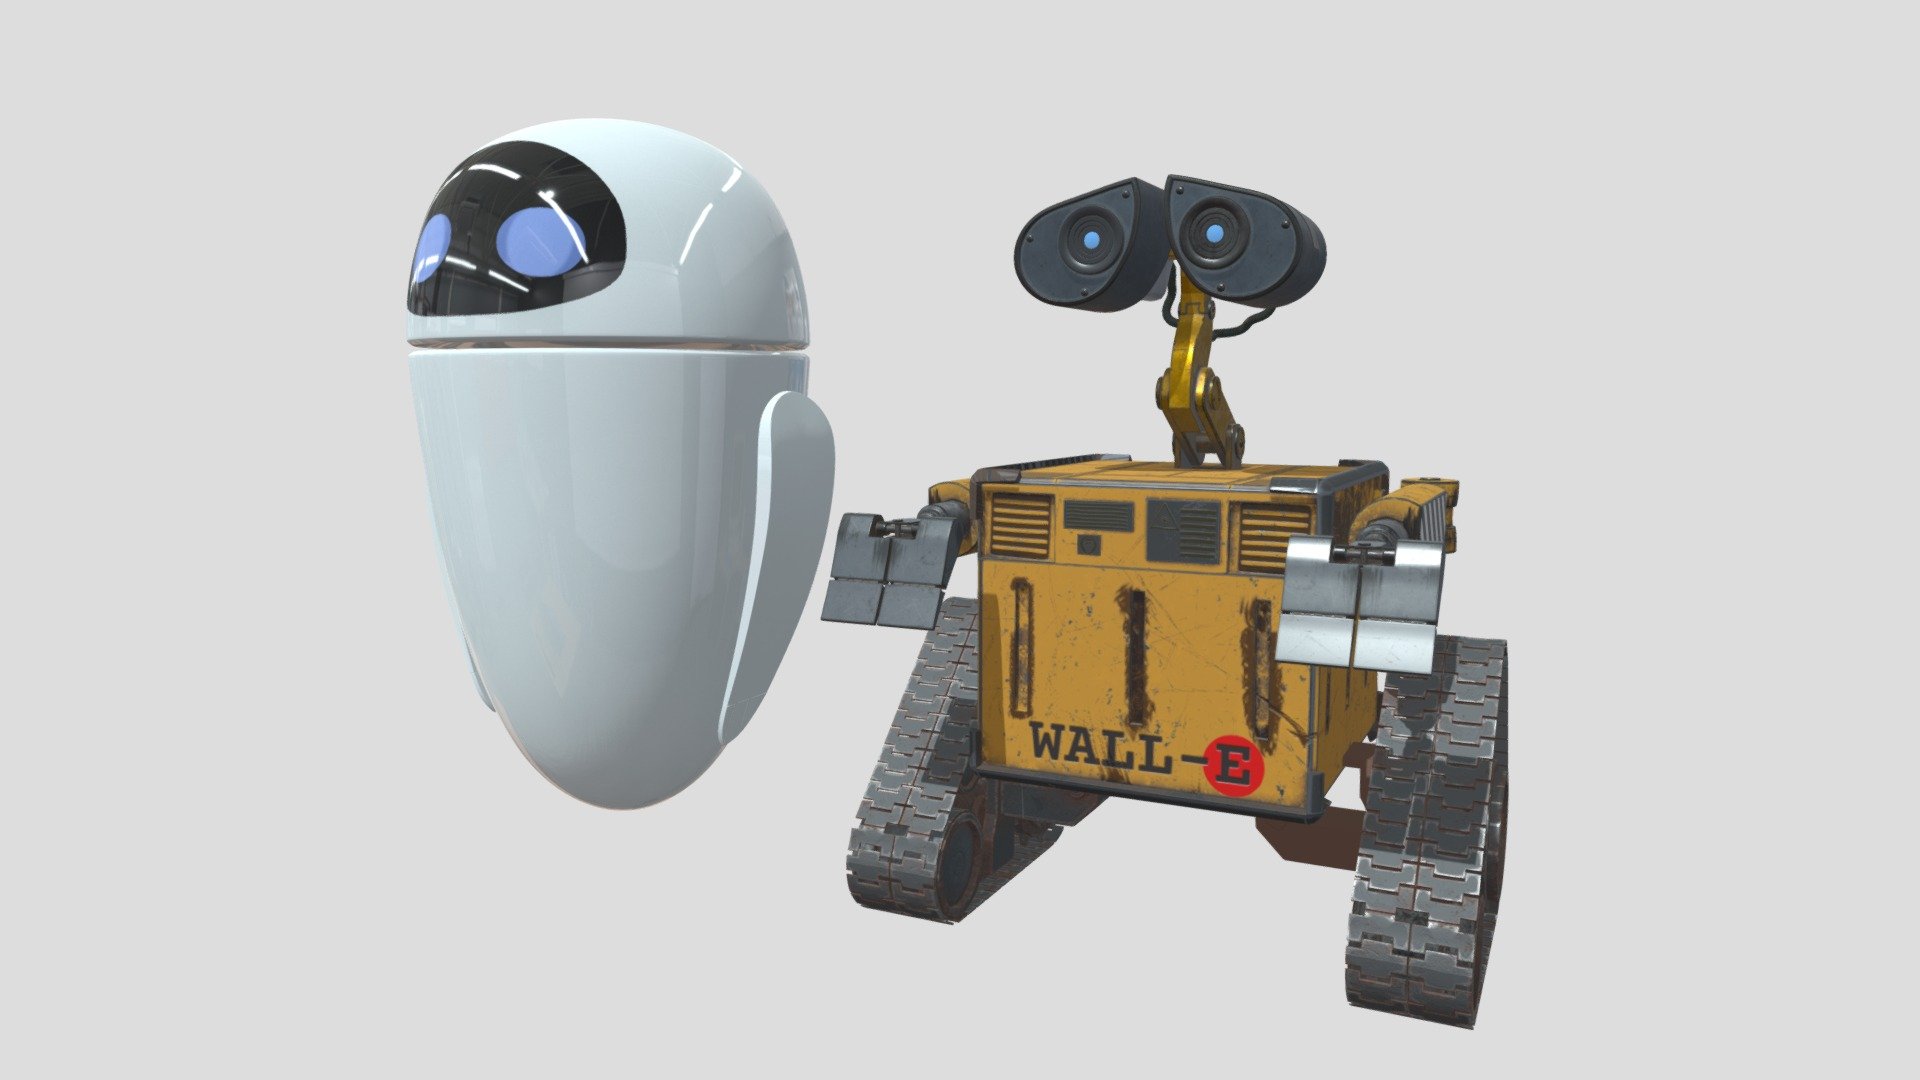 Eva and WallE